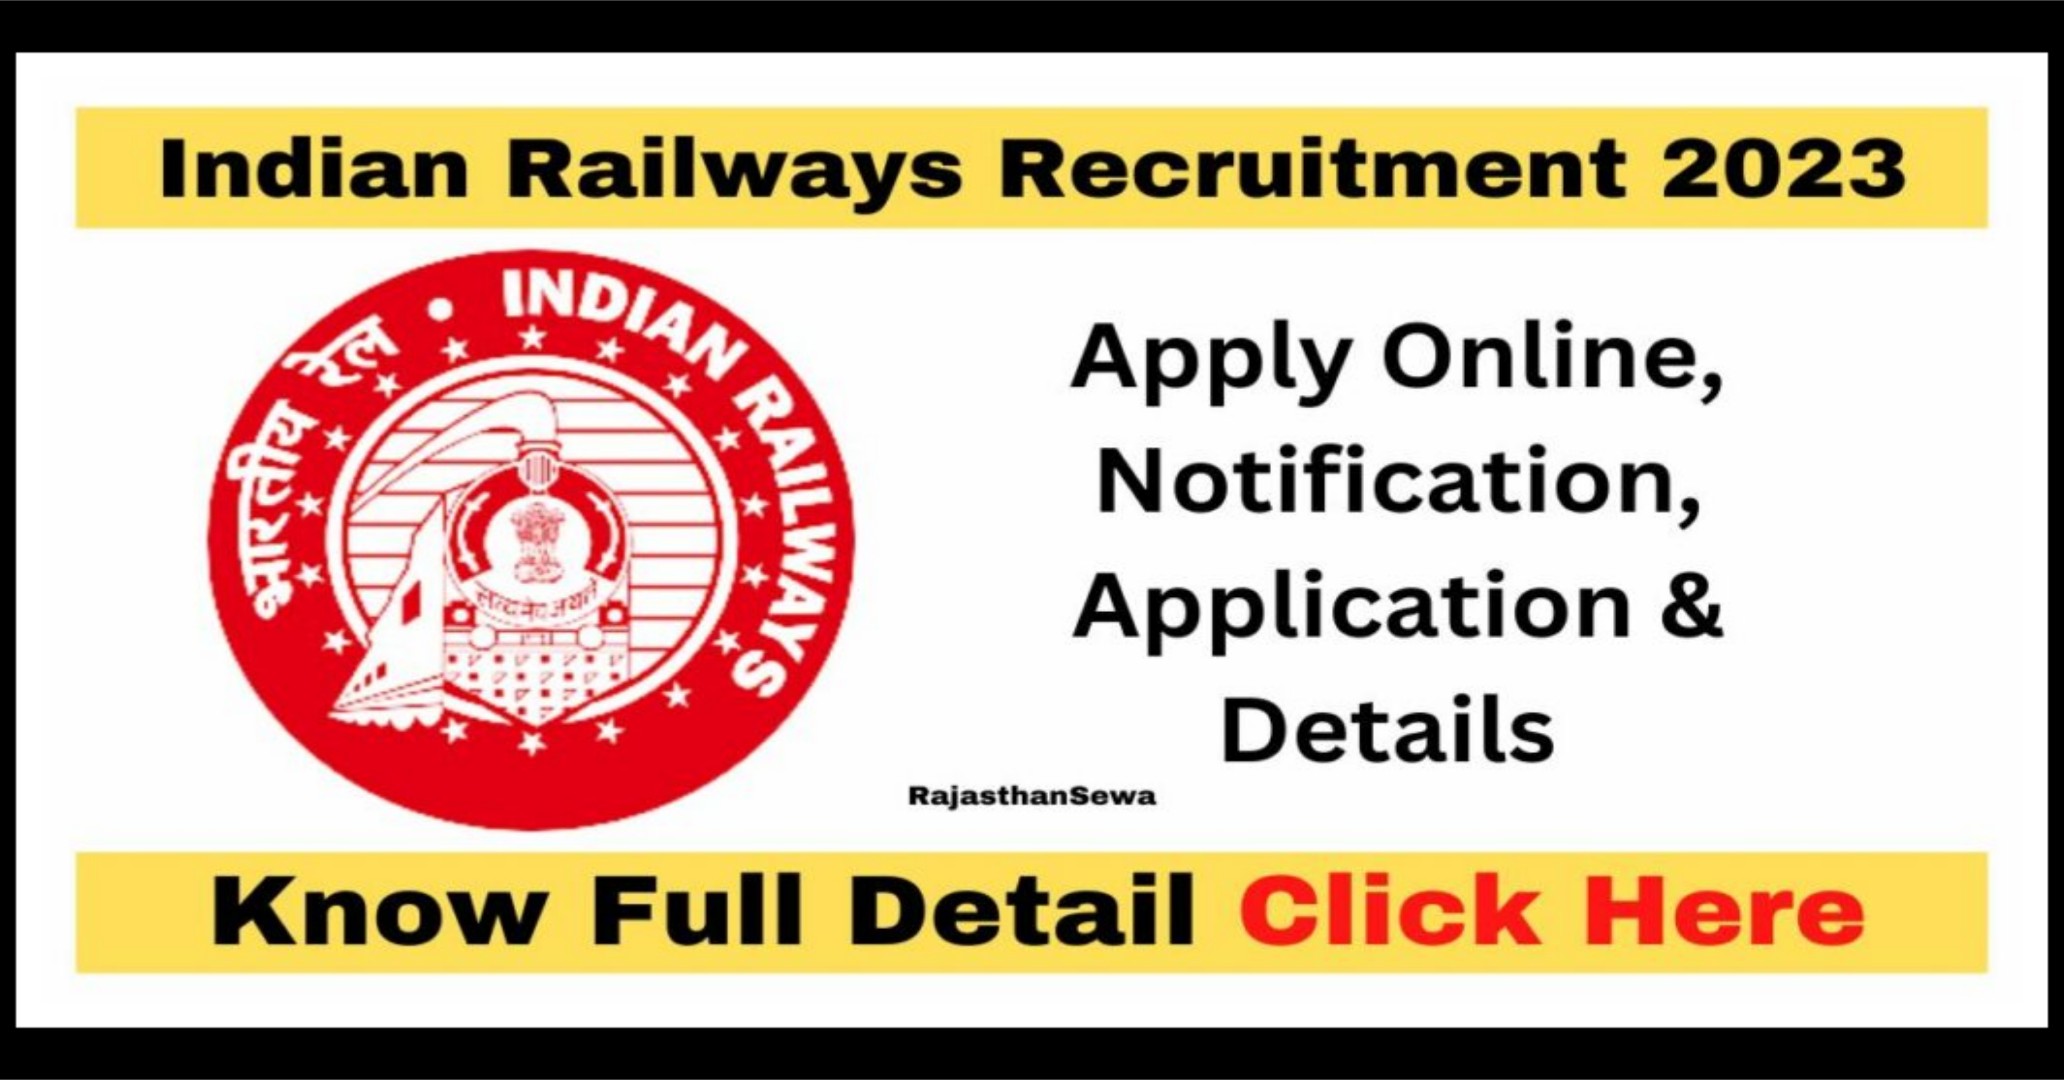 RRB Recruitment 2023 : New Railway Vacancies Announced, Check Salary, Qualification, Last Date To Apply